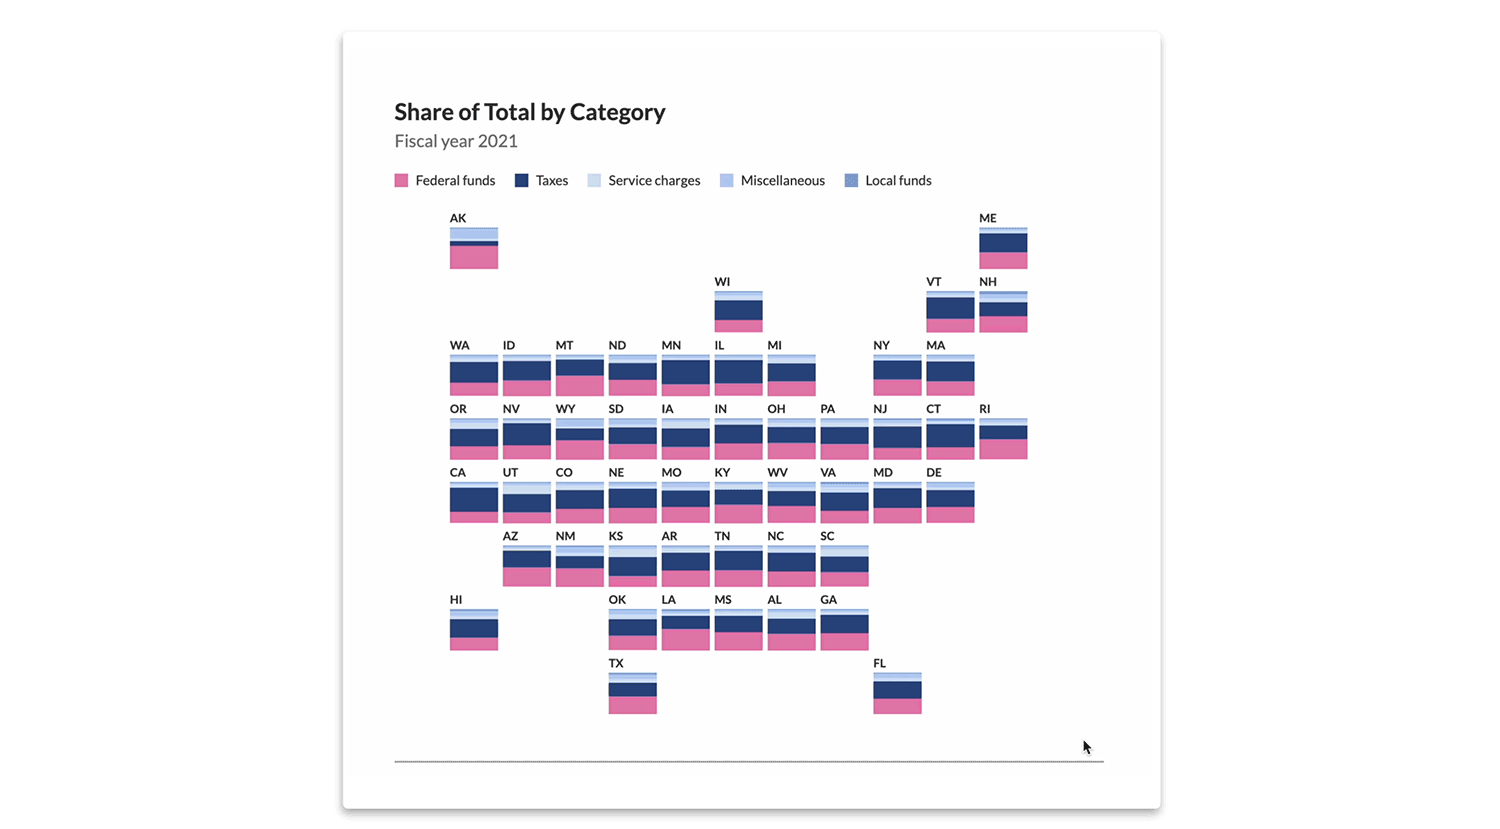 Chart titled 'Share of Total by Category, Fiscal Year 2021' displayed in a grid representing each U.S. state. Each state's data is shown as a stacked bar chart divided into five categories: Federal funds, Taxes, Service charges, Miscellaneous, and Local funds. The chart uses different colors to represent each category, with Federal funds in pink, Taxes in dark blue, Service charges in light blue, Miscellaneous in purple, and Local funds in dark purple. The layout resembles a map of the United States with each state's stacked bar positioned accordingly